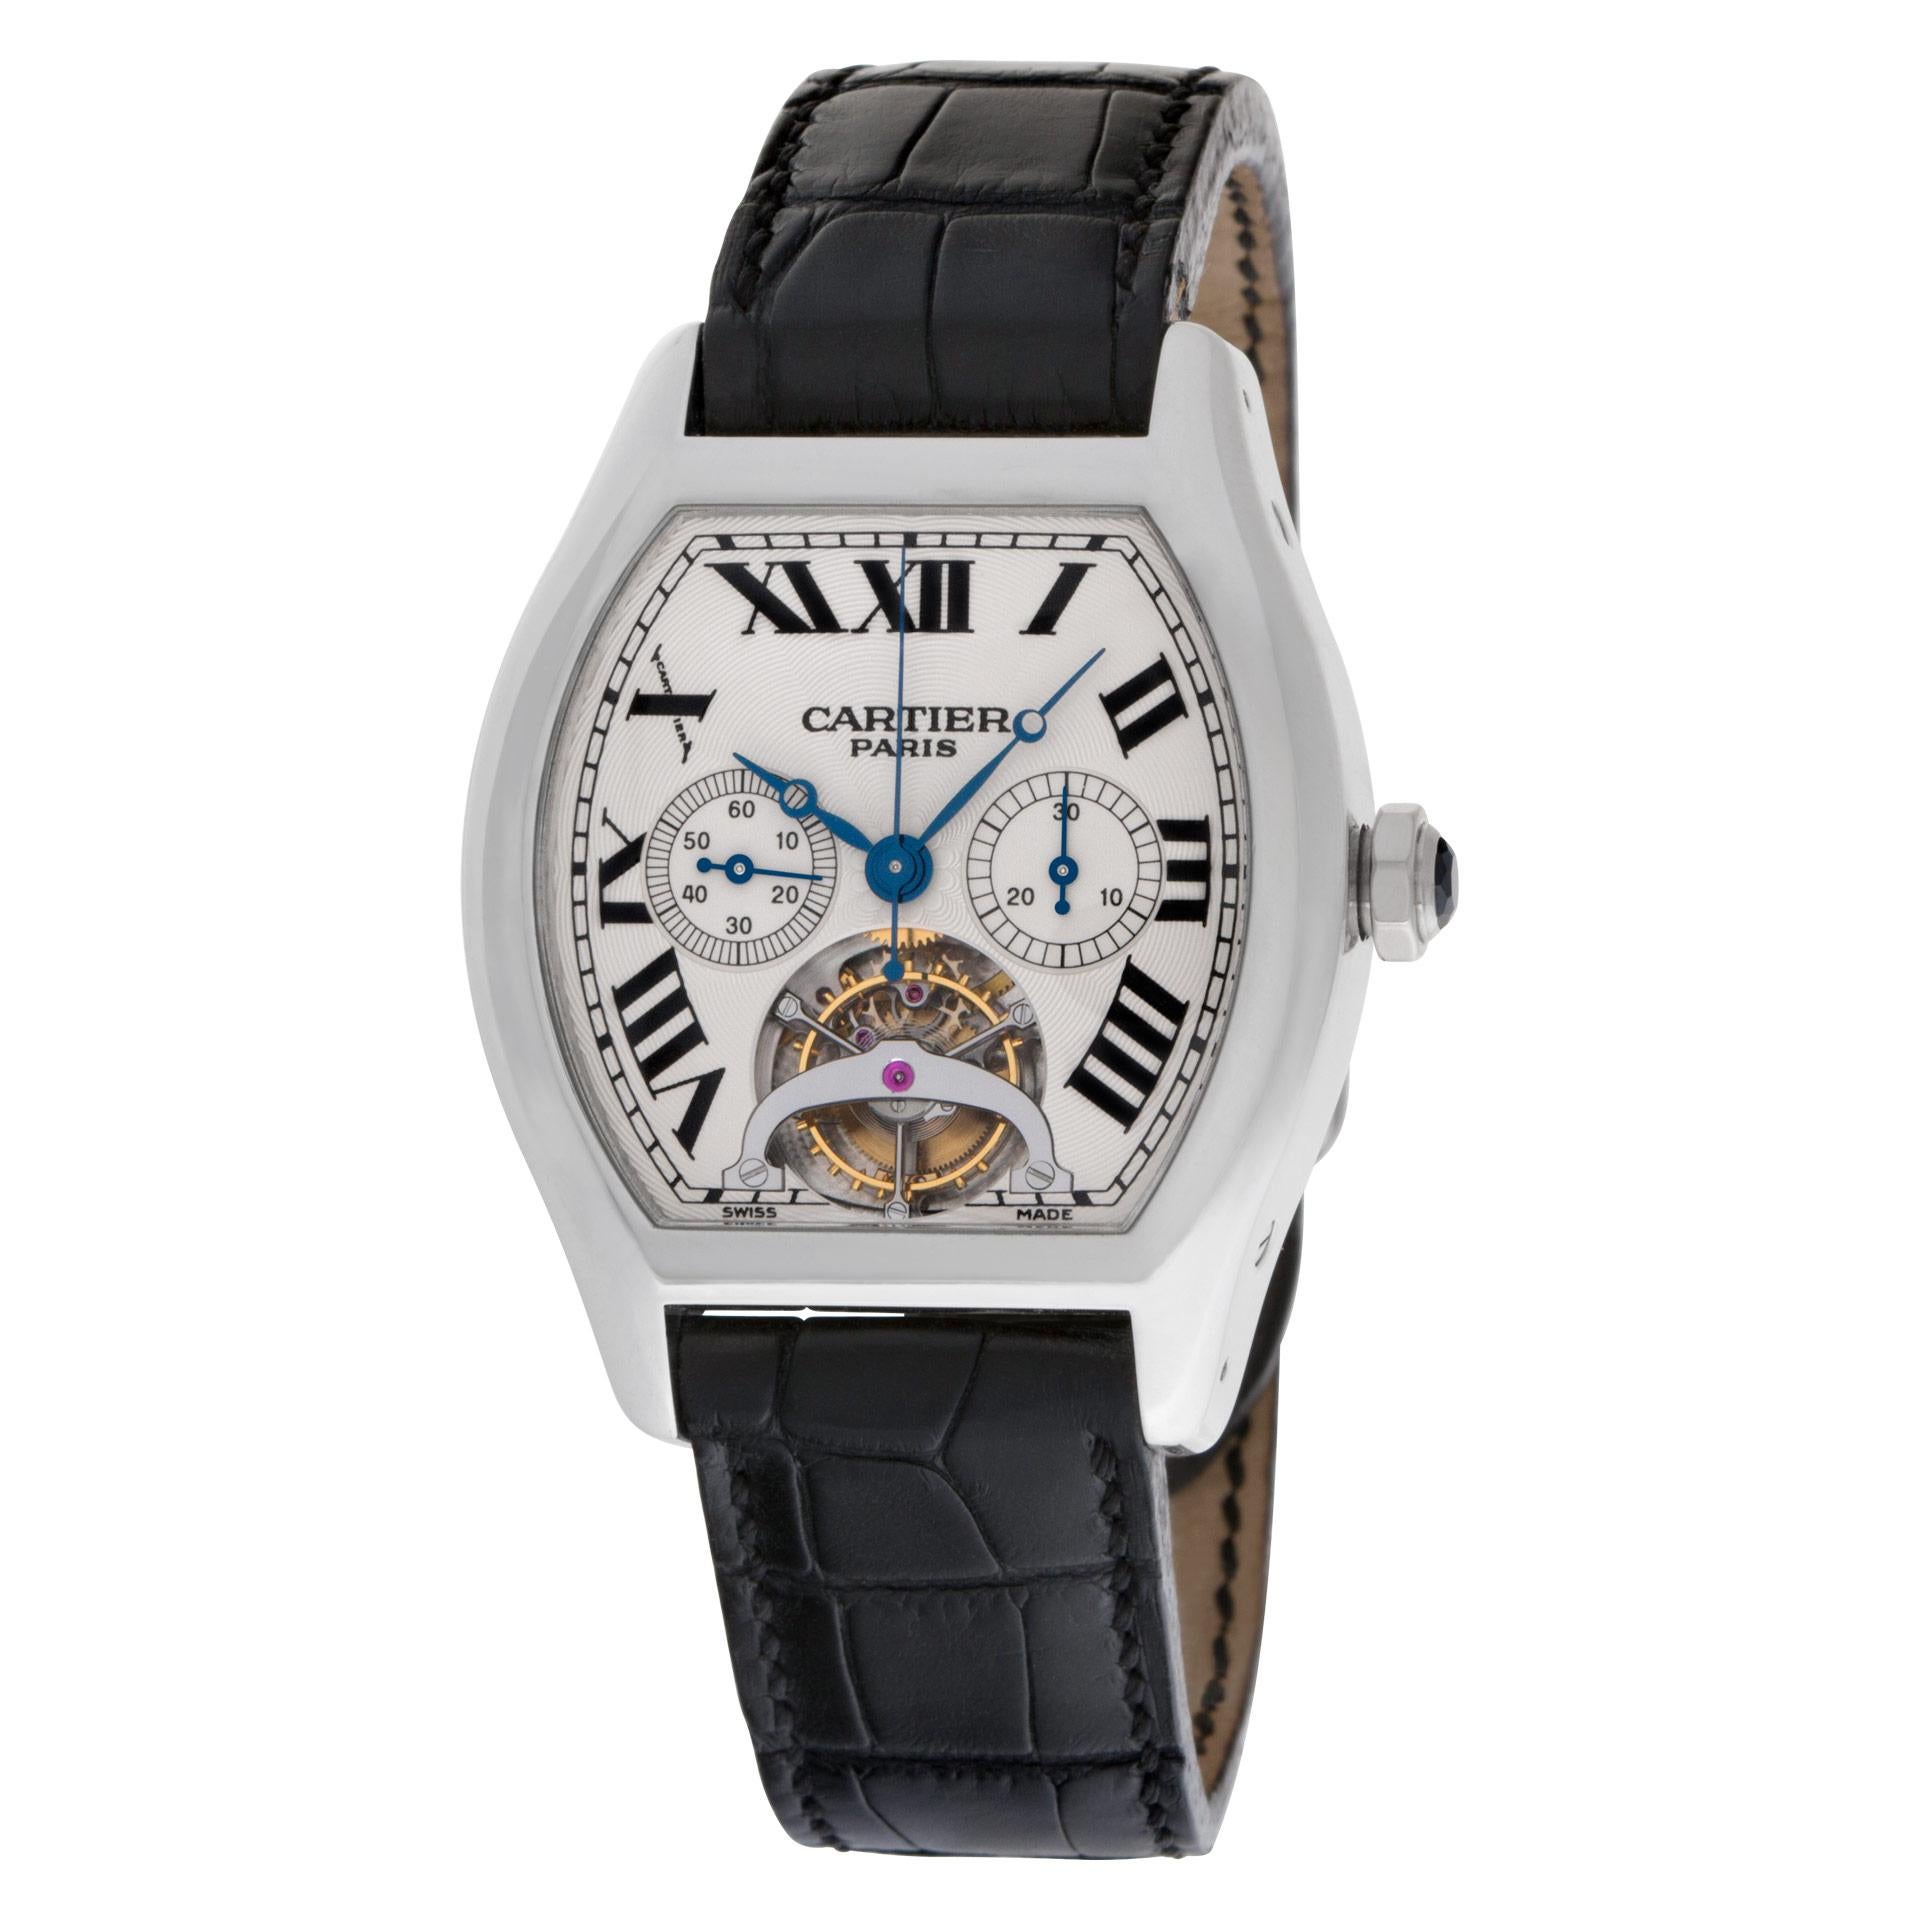 ESTIMATED RETAIL $210,000.00 YOUR PRICE $105,500.00 - 100% AUTHENTIC, FACTORY ORIGINAL Cartier Tortue XL Tourbillon Chronograph Monopoussoir in platinum with single button chronograph on an alligator strap. Manual w/ subseconds, chronograph, and